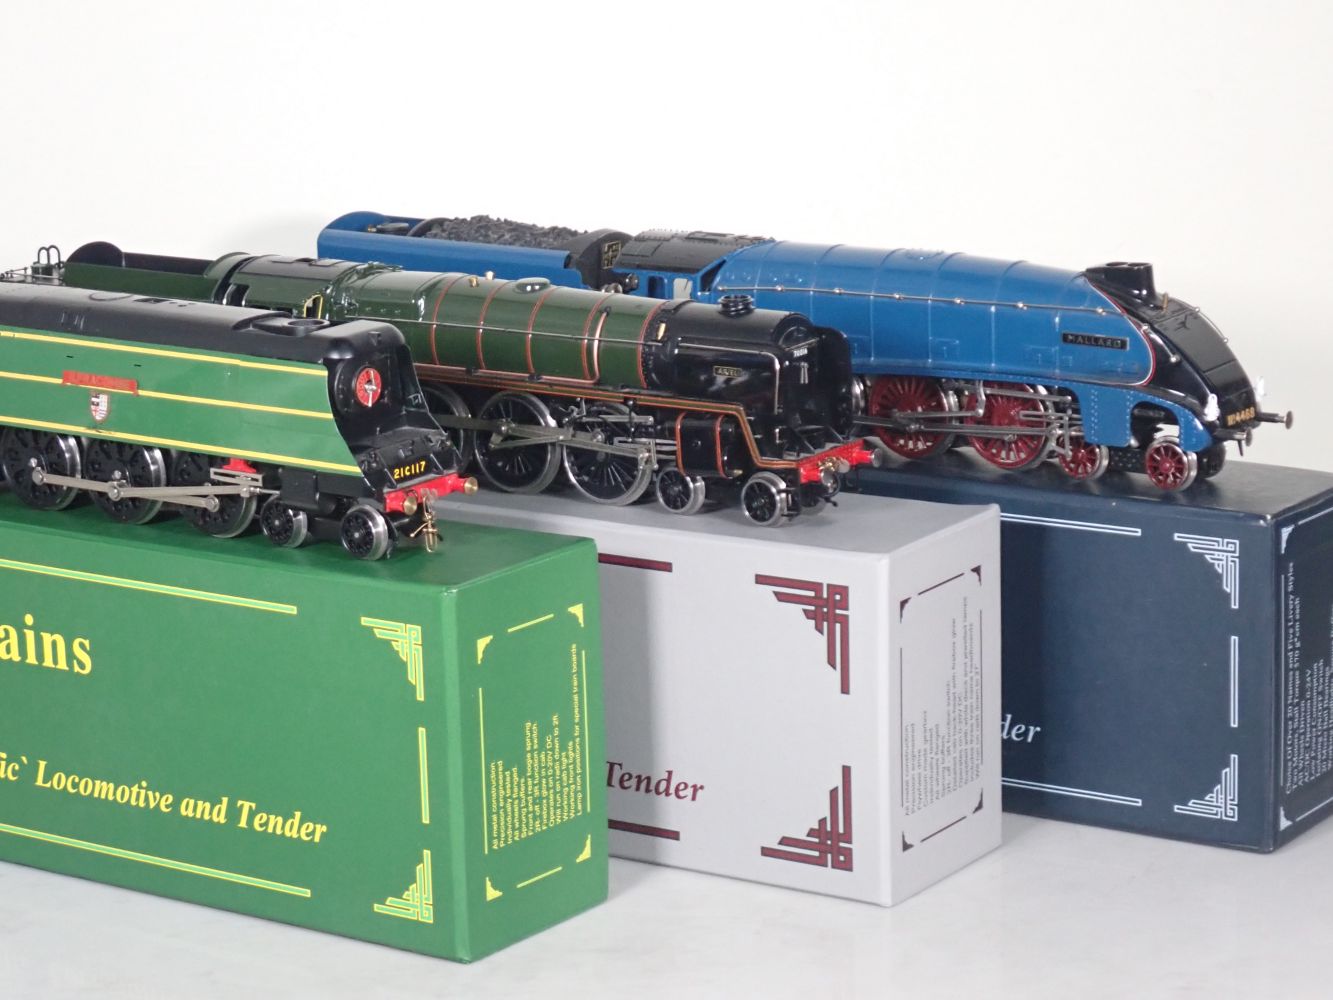 Quarterly sale of Model Railway, Diecast Models, Tinplate and Live Steam Engines